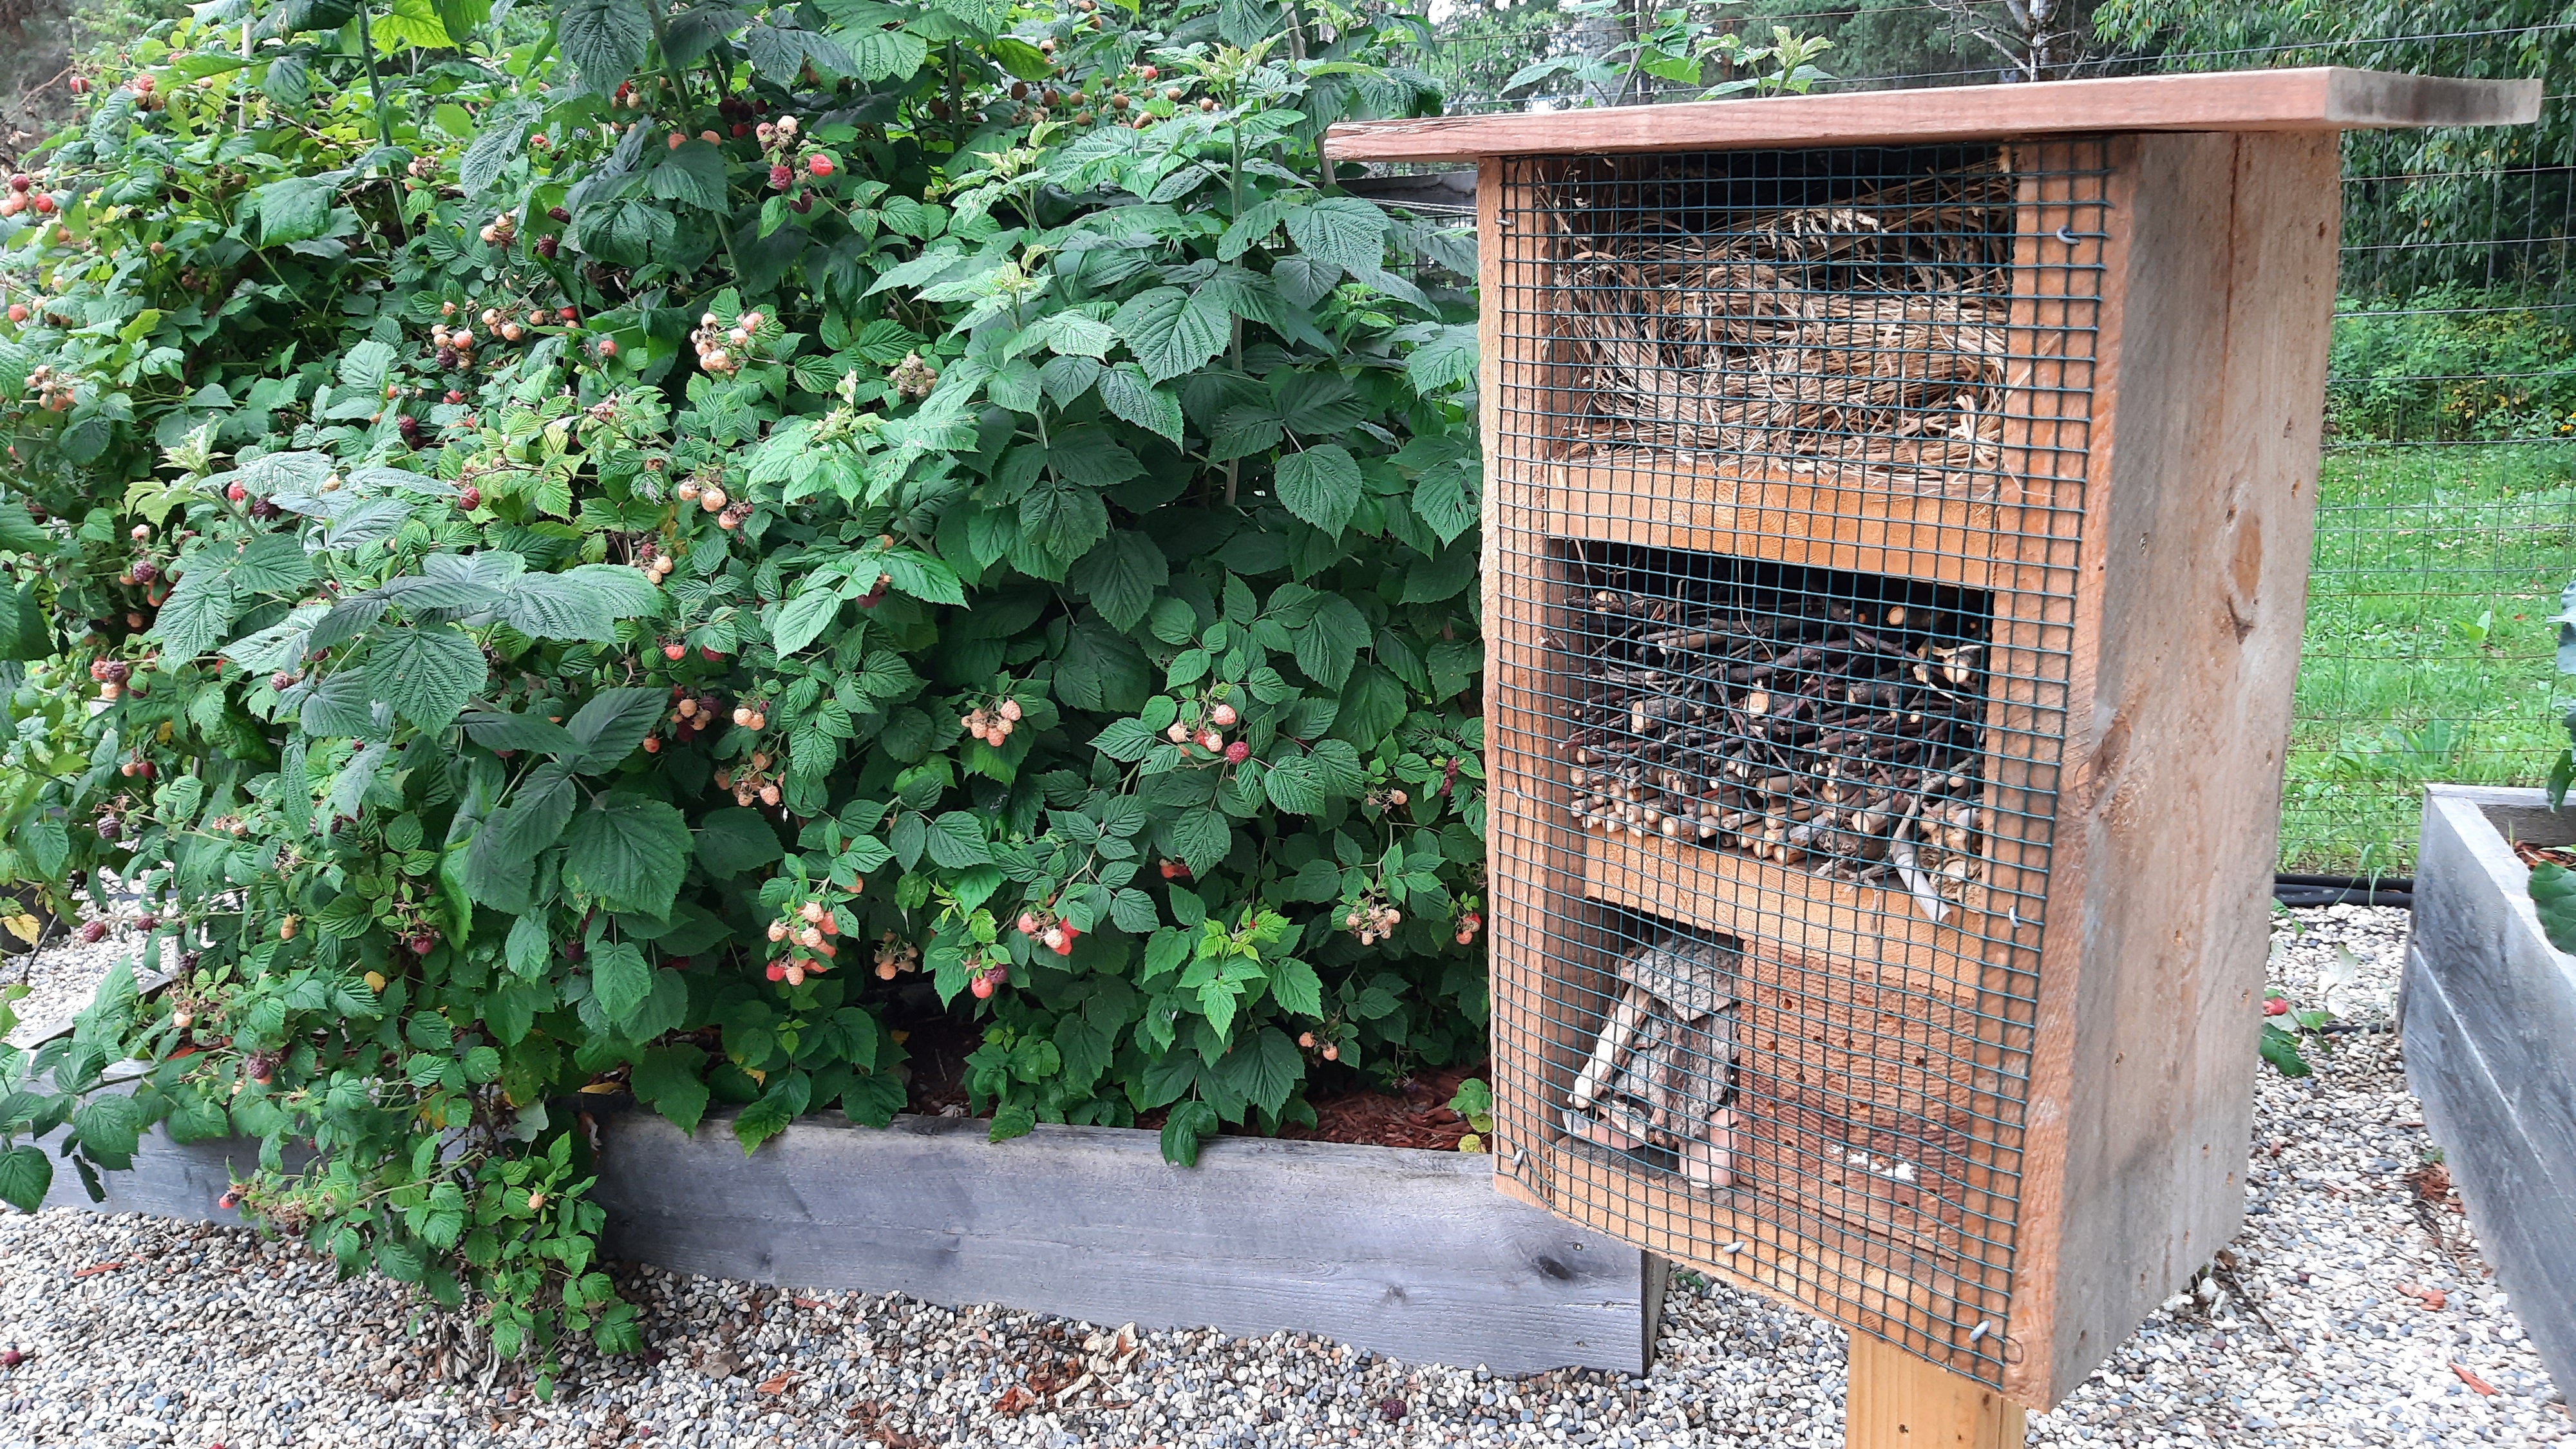 a bug hotel can offer native insects a safe place to live near garden plants